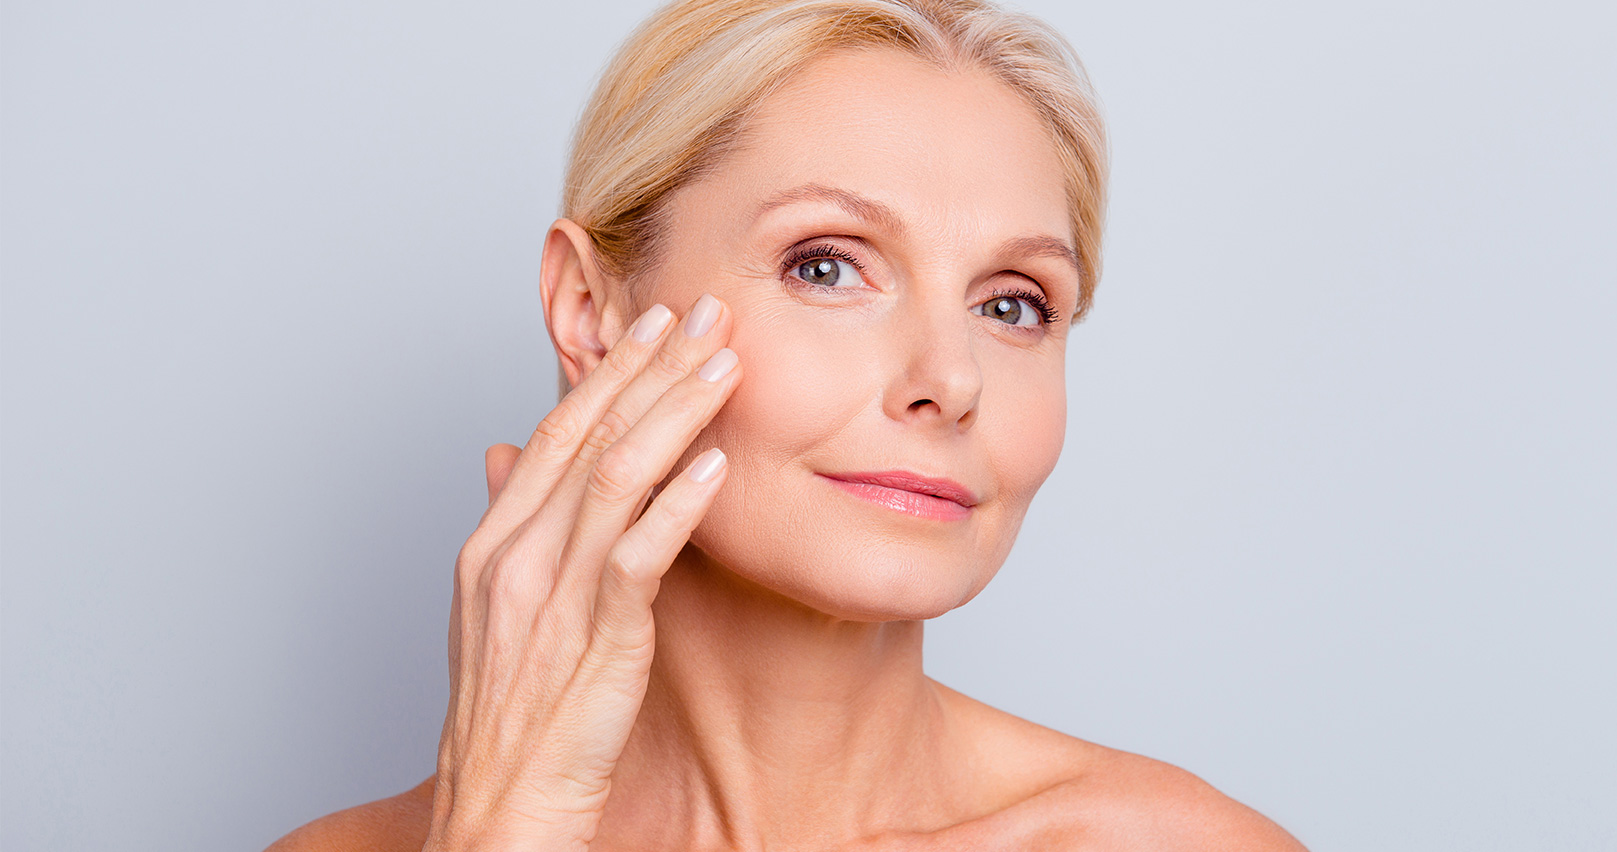 Fine Lines & Wrinkles - 8 Common Causes Treatments & Prevention